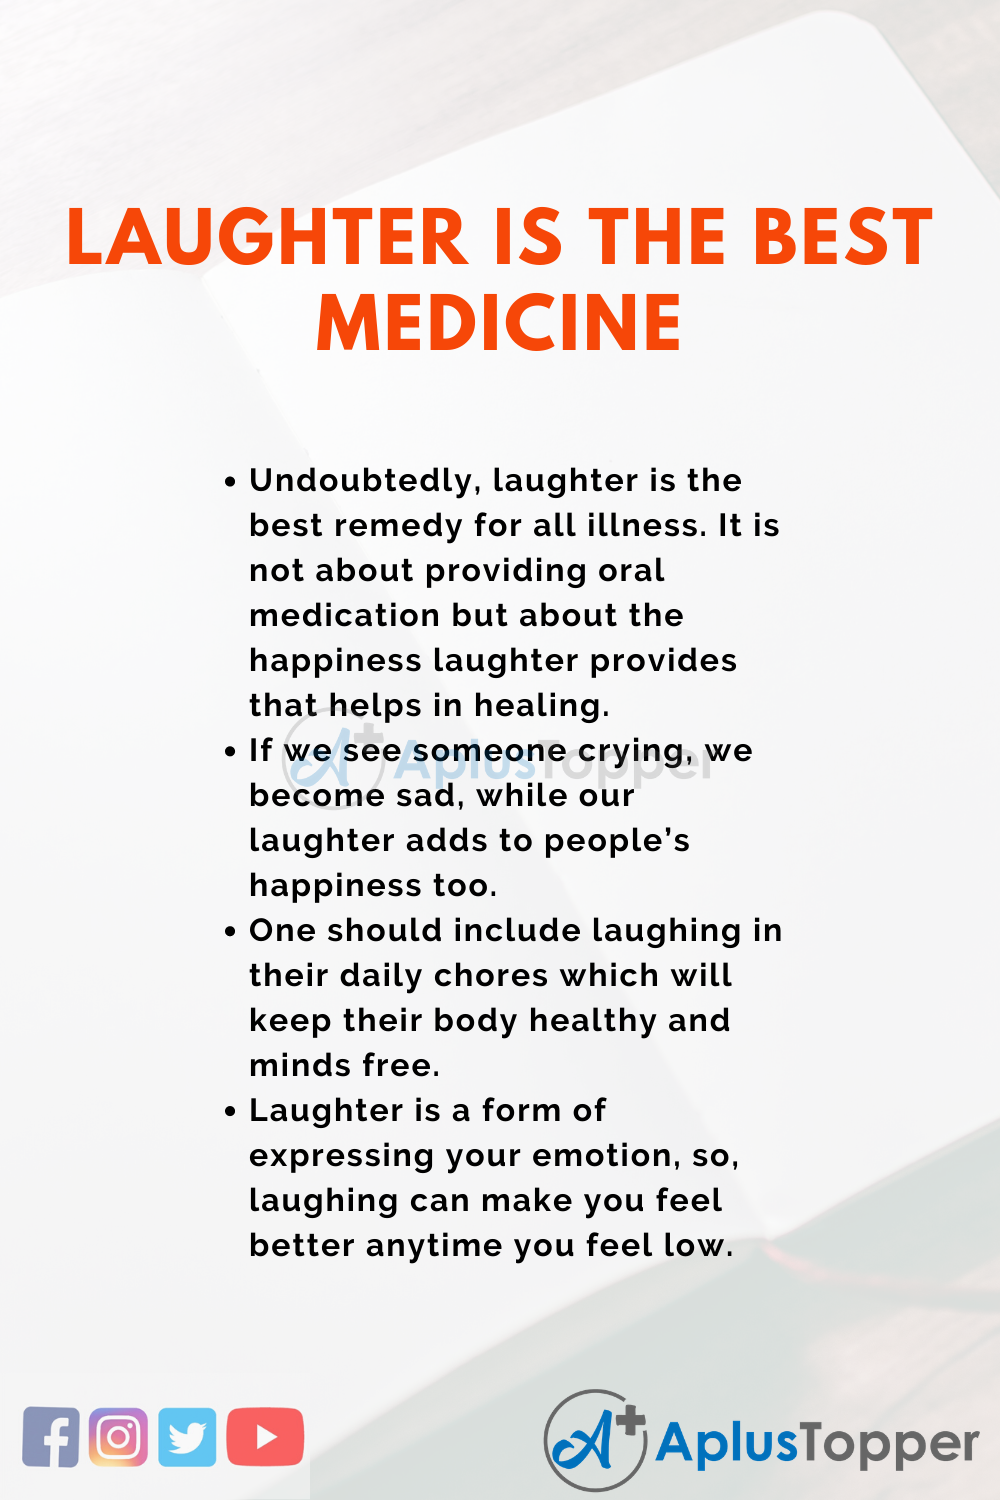 laughing is the best medicine essay writing